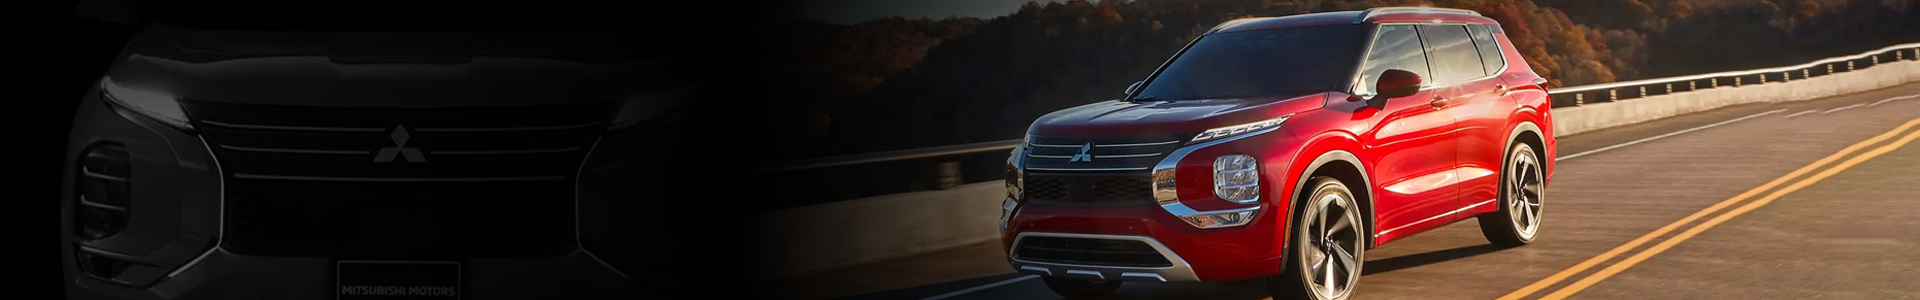 Mitsubishi Car Loans & Finance Options in Hagerstown, MD At Younger Mitsubishi